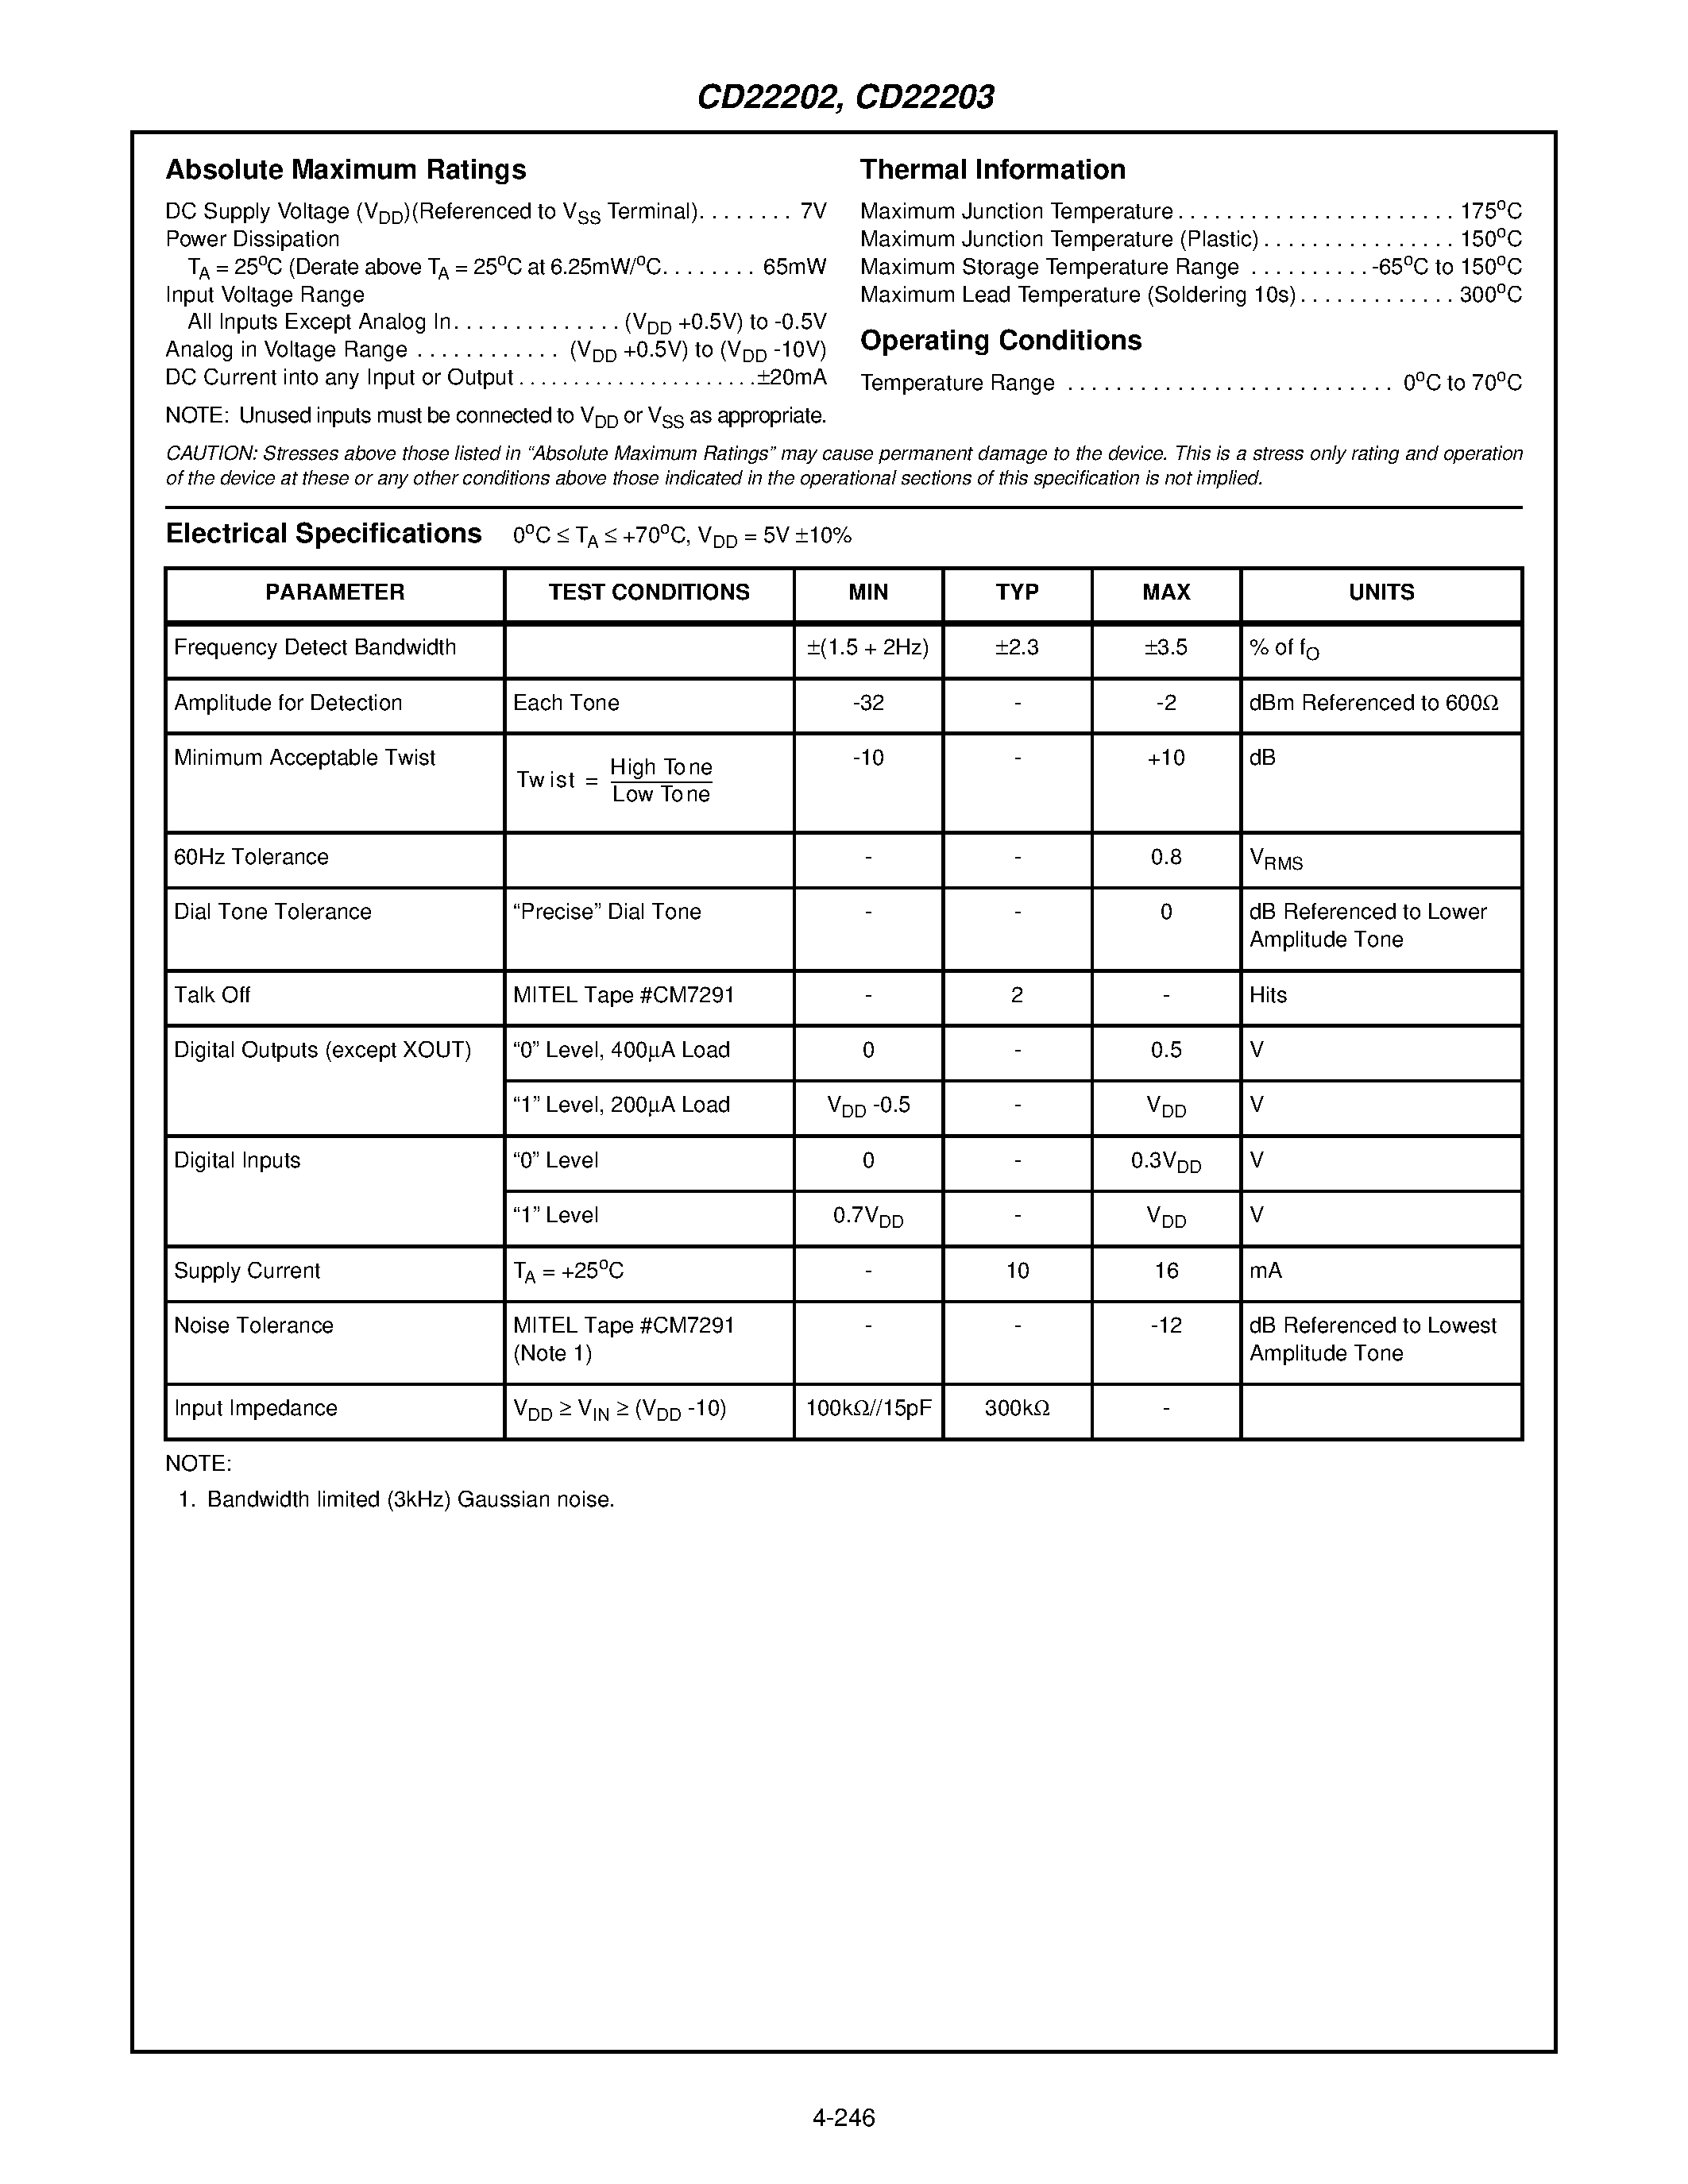 Datasheet CD22203 - 5V Low Power DTMF Receiver page 2